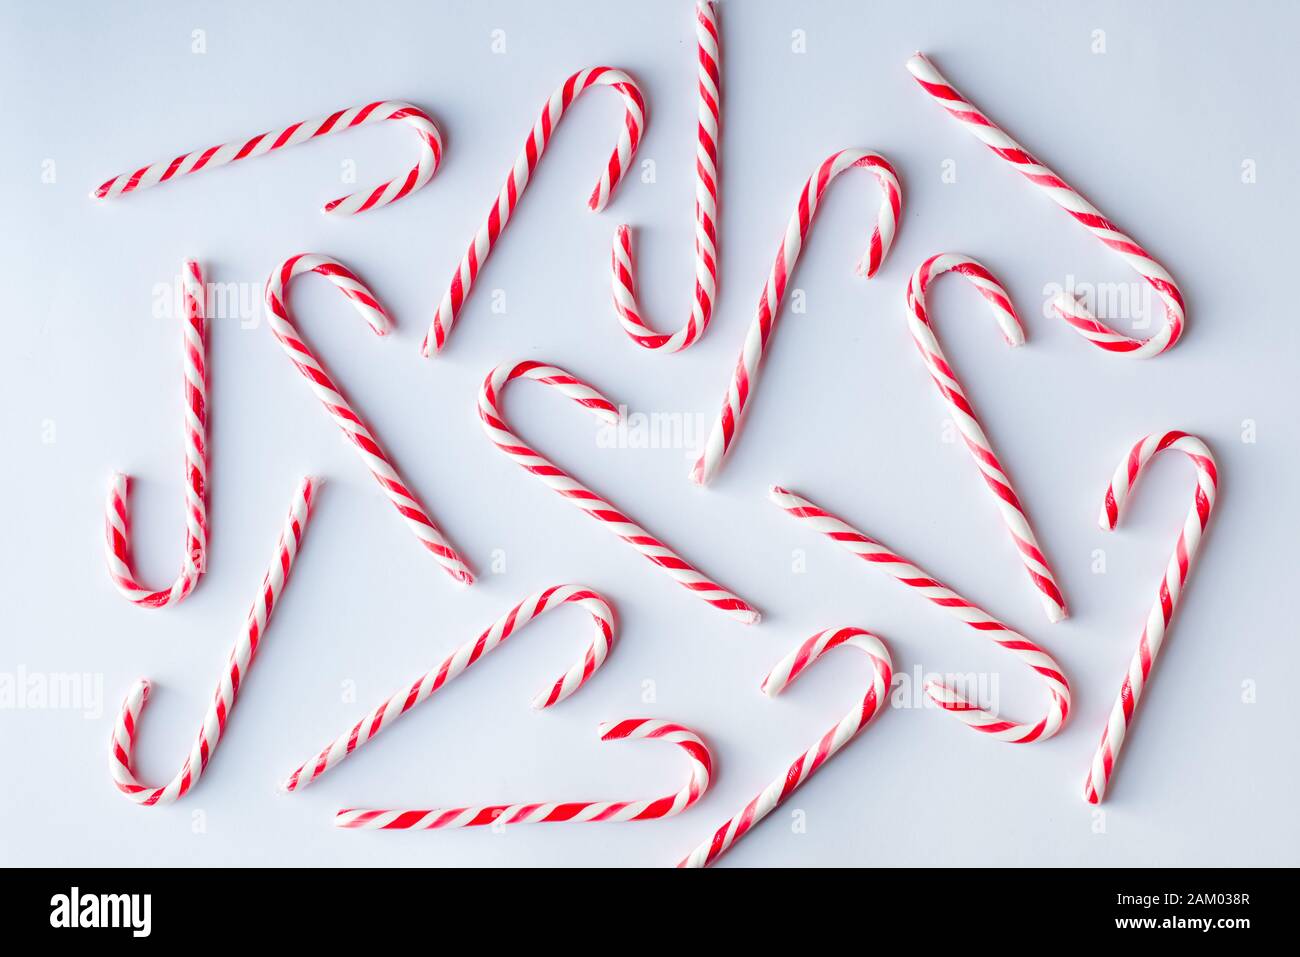 Overhead image of candy canes scattered on a plain white background. Stock Photo